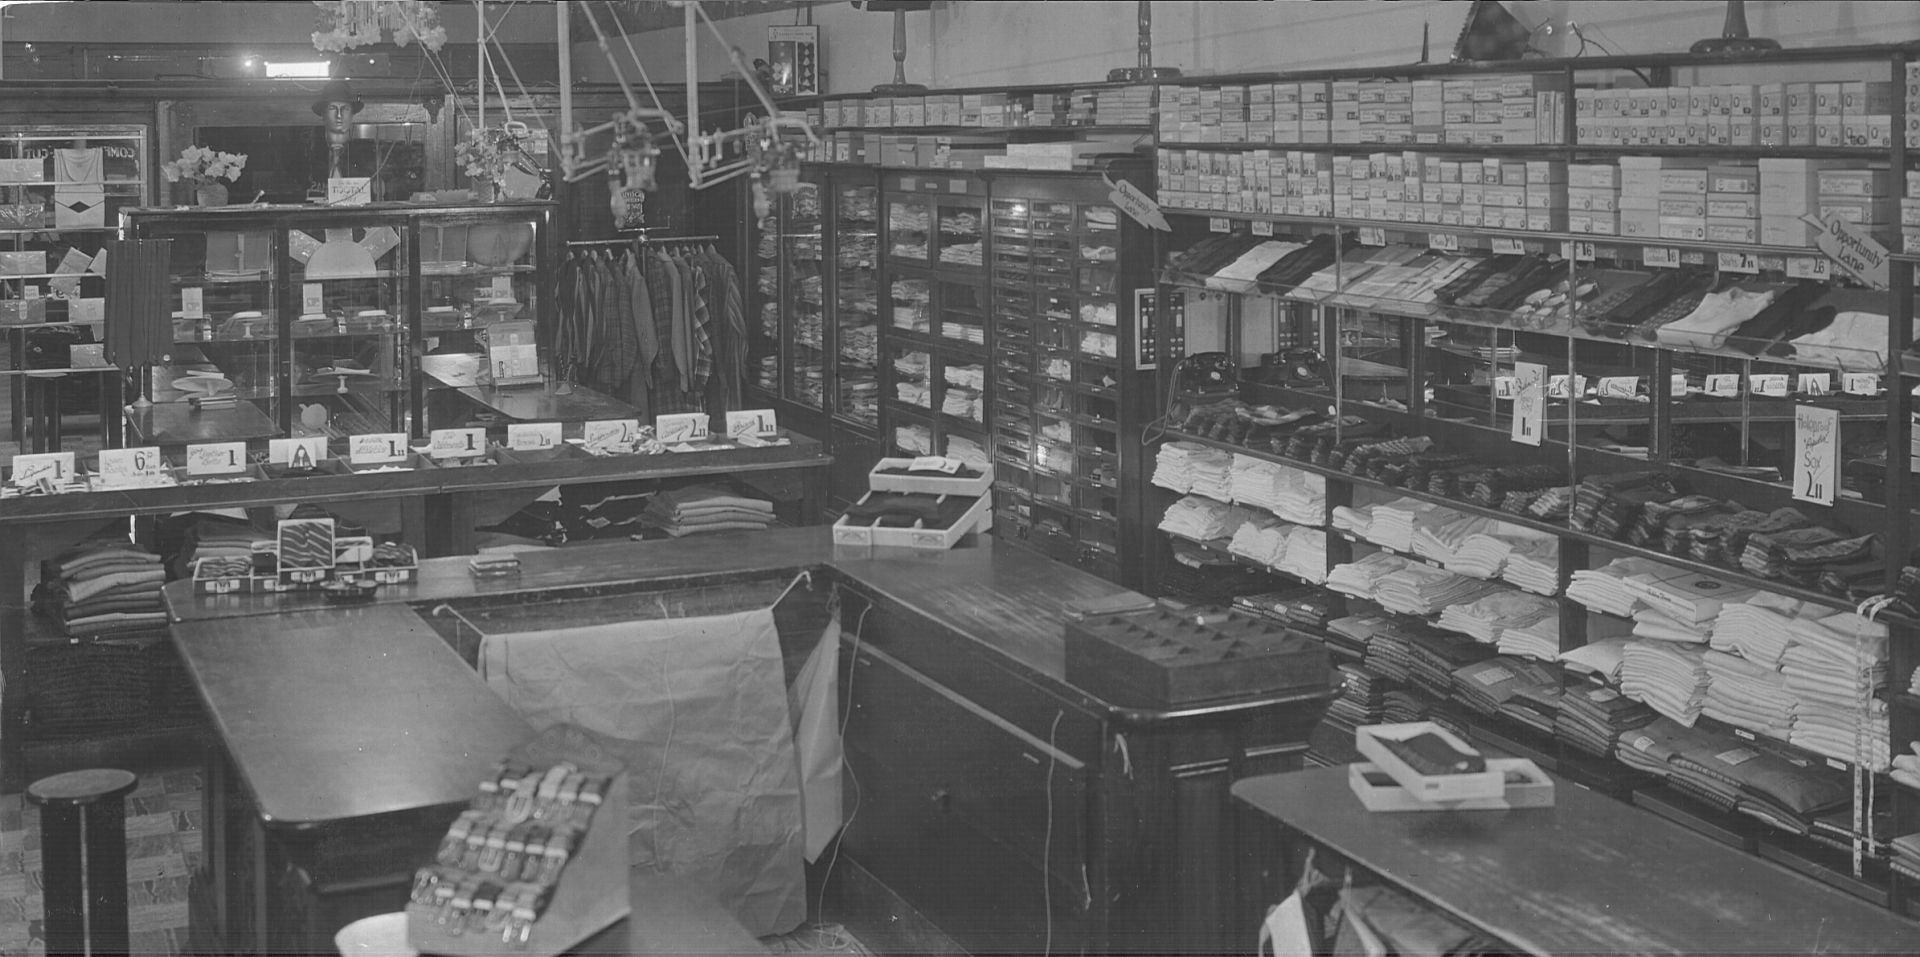 Inside the Man's Shop - late 1930's. Photo: Jones Family Collection 